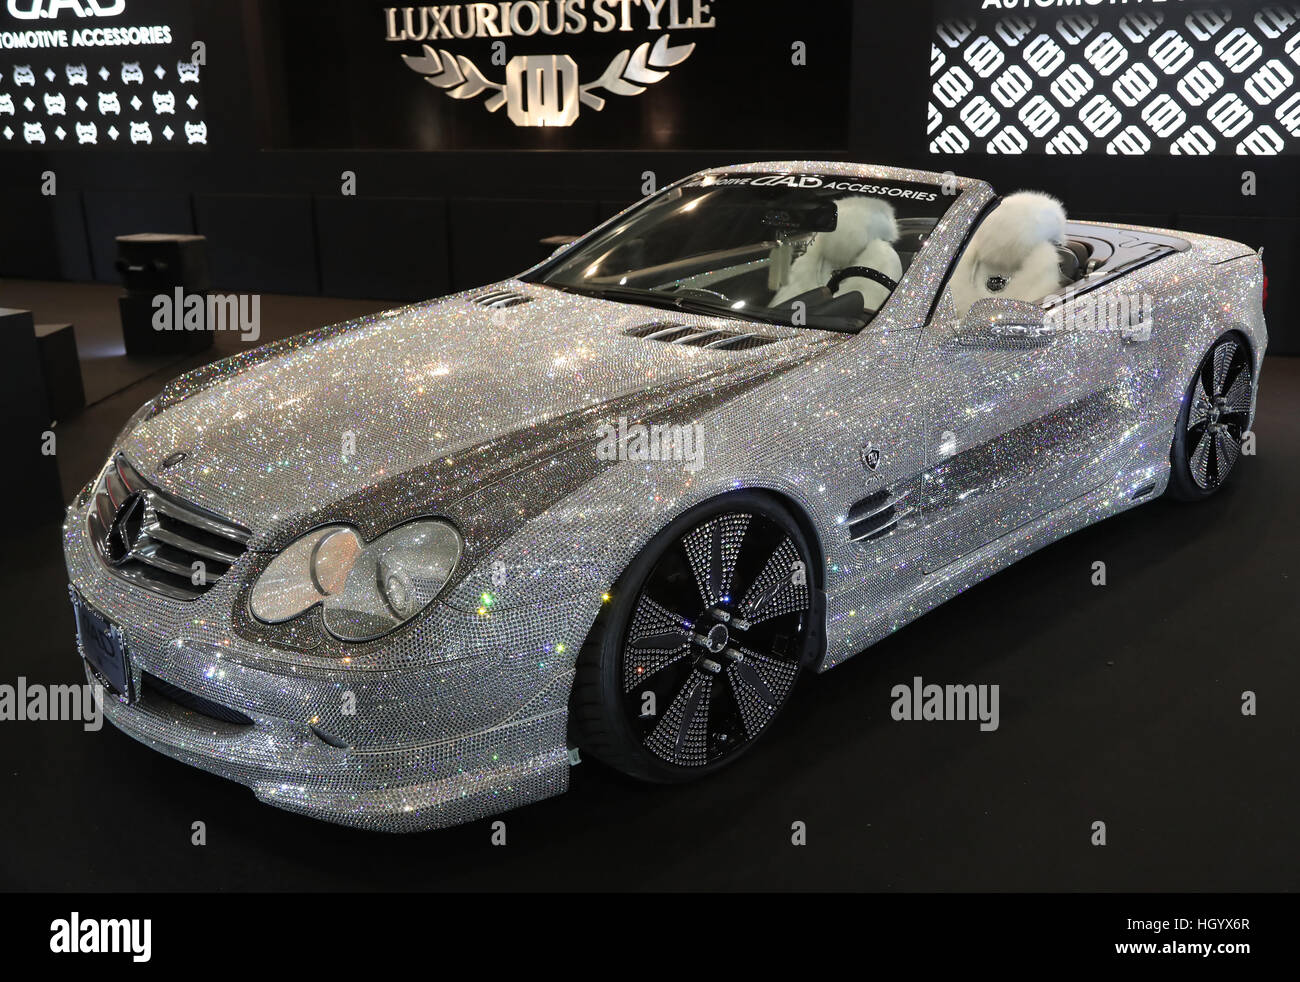 Chiba, Japan. 13th Jan, 2017. A Mercedes vehicle decorated with Swarovski  crystals is displayed at the Tokyo Auto Salon 2017 in Chiba, suburban Tokyo  on Friday, January 13, 2017. More than 400